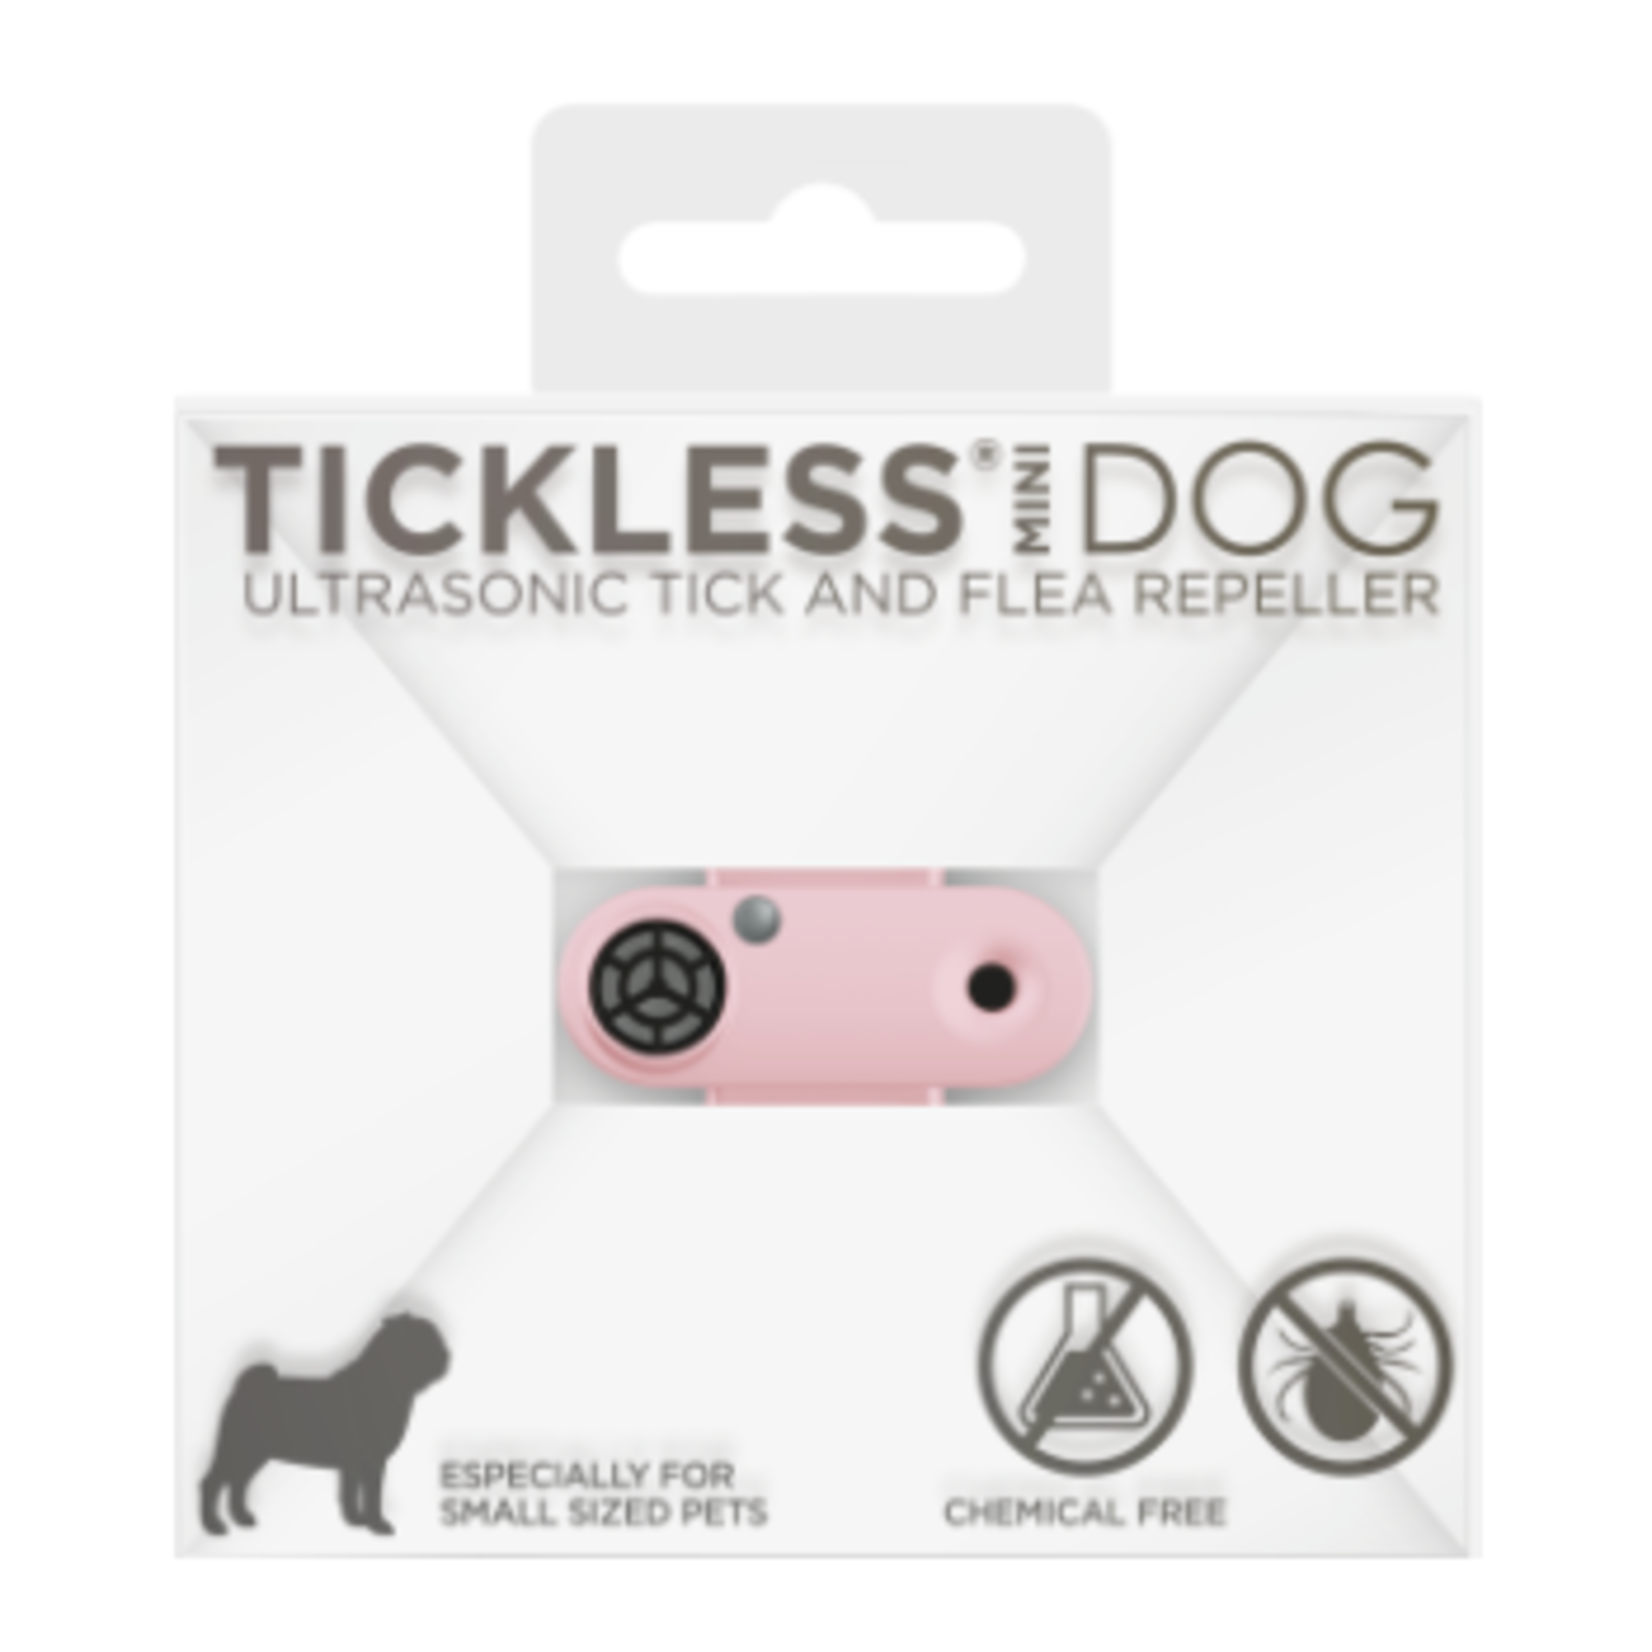 Tickless Small sized Pet - Rechargeable - Ultrasonic Tick and Flea Repeller